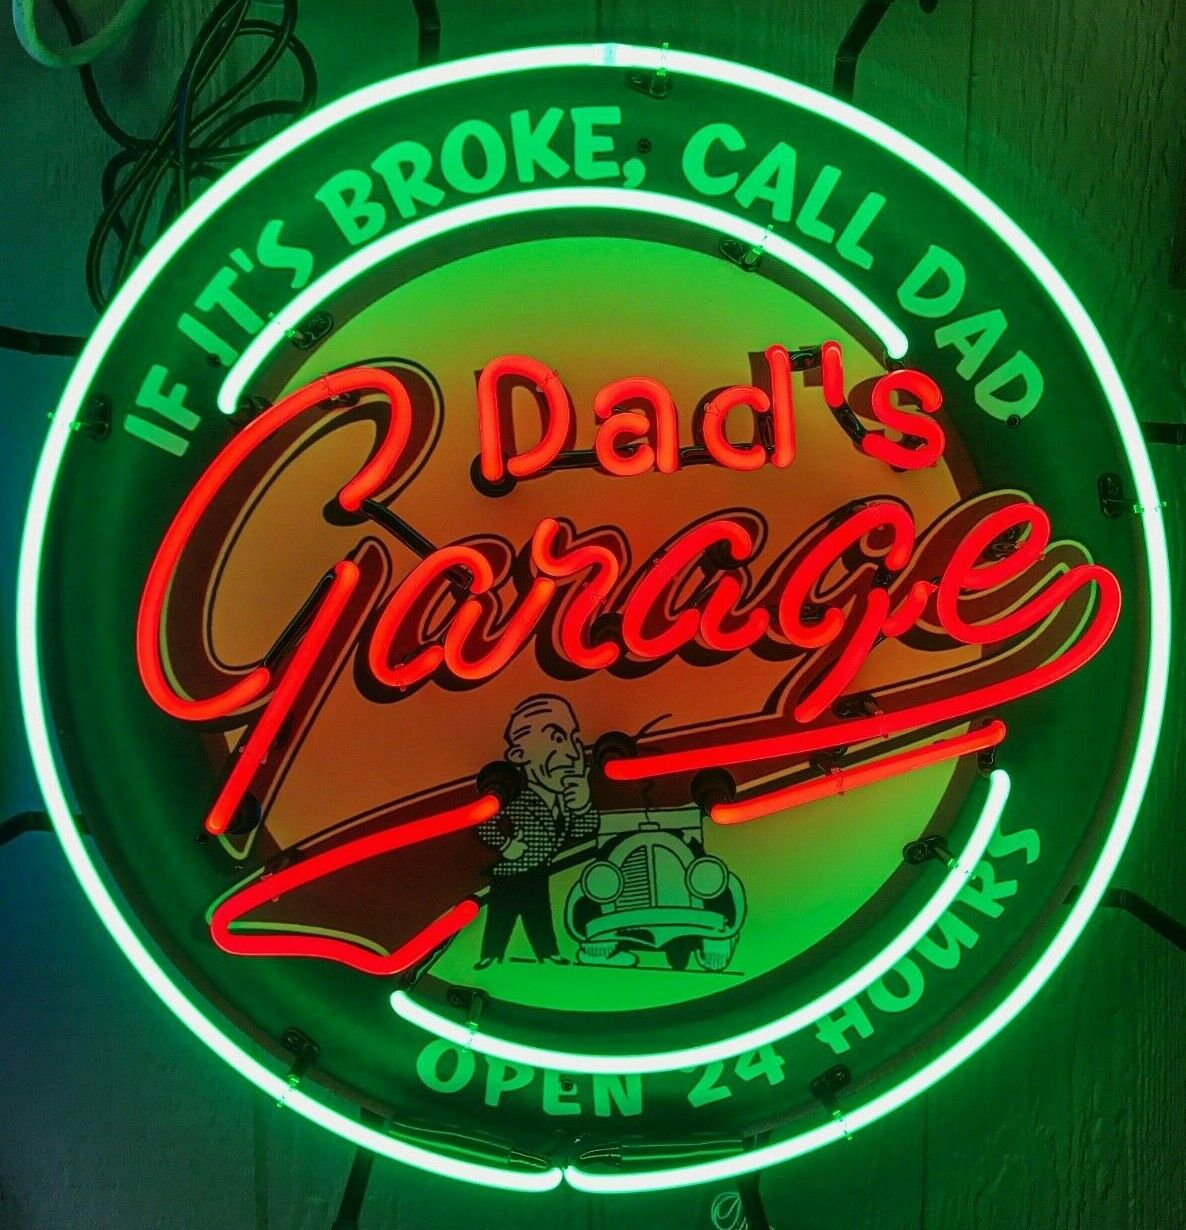 DAD'S GARAGE NEON SIGN- APPROXIMATELY 24